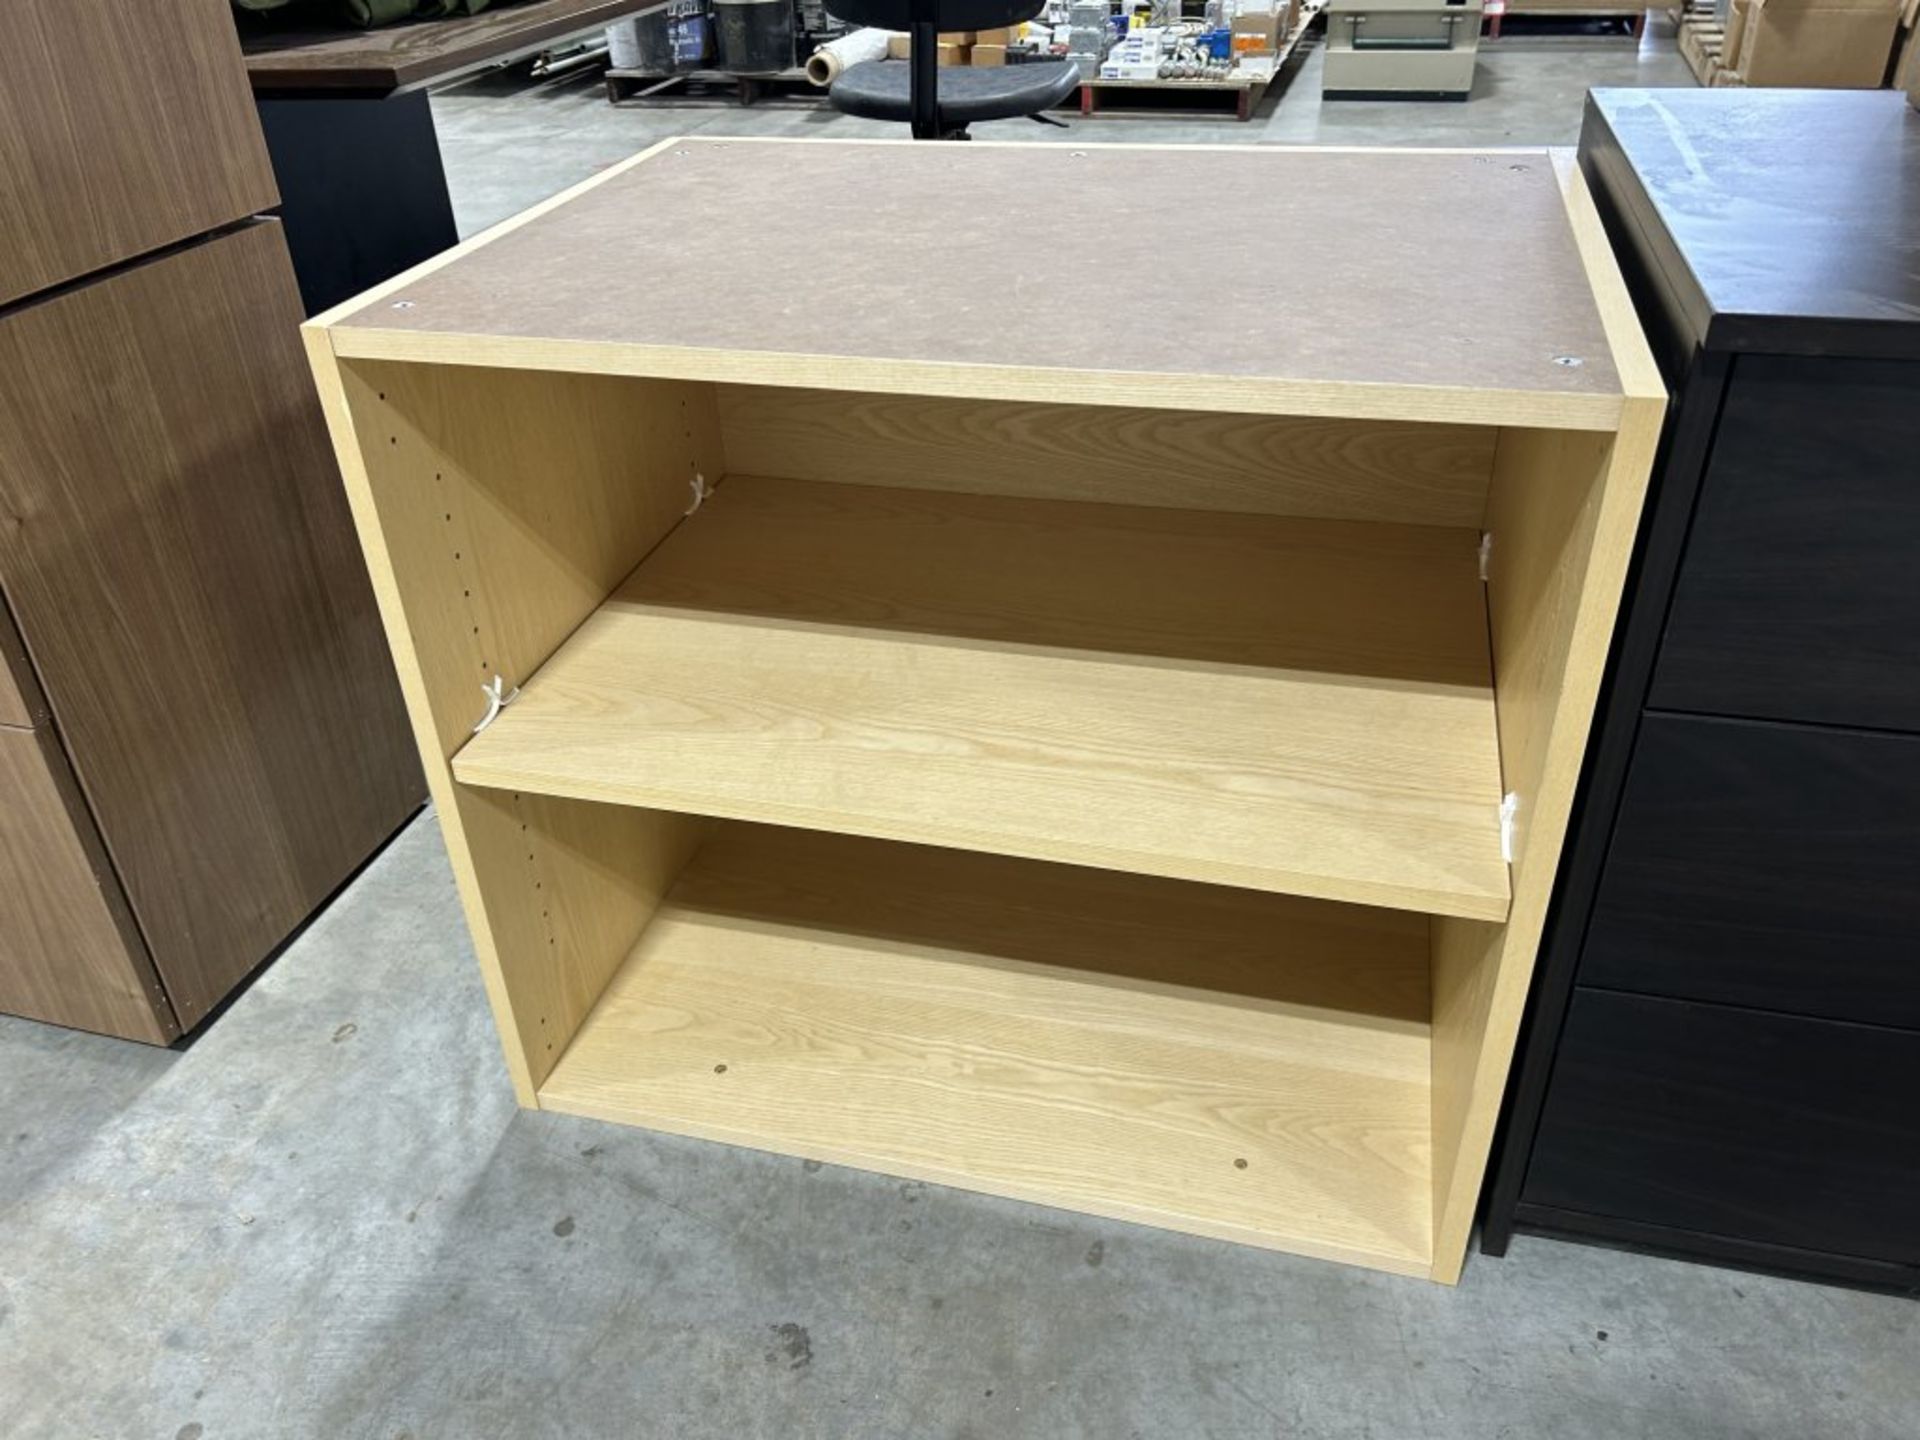 5-DRAWER CABINET 37-1/2" x 18", 3-DRAWER CABINET 30" X 23-3/4", SHELF UNIT 32" X 22-3/4" AND (5) NEW - Image 10 of 10